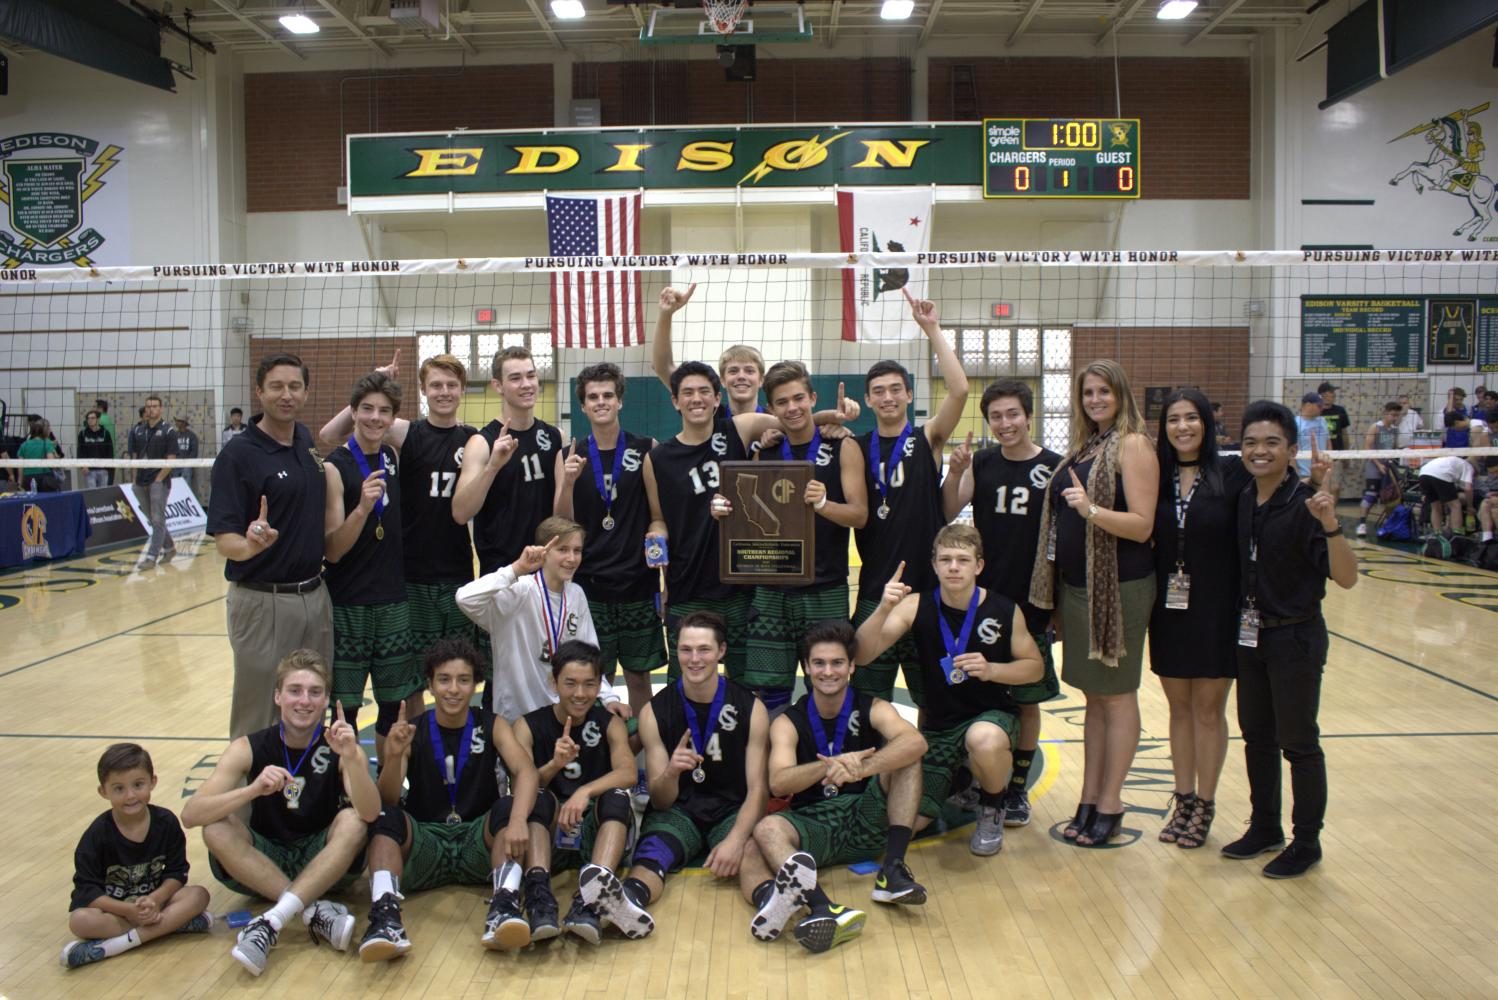 The Boys 2017 Varsity Volleyball team proudly displays their state championship trophy and medals